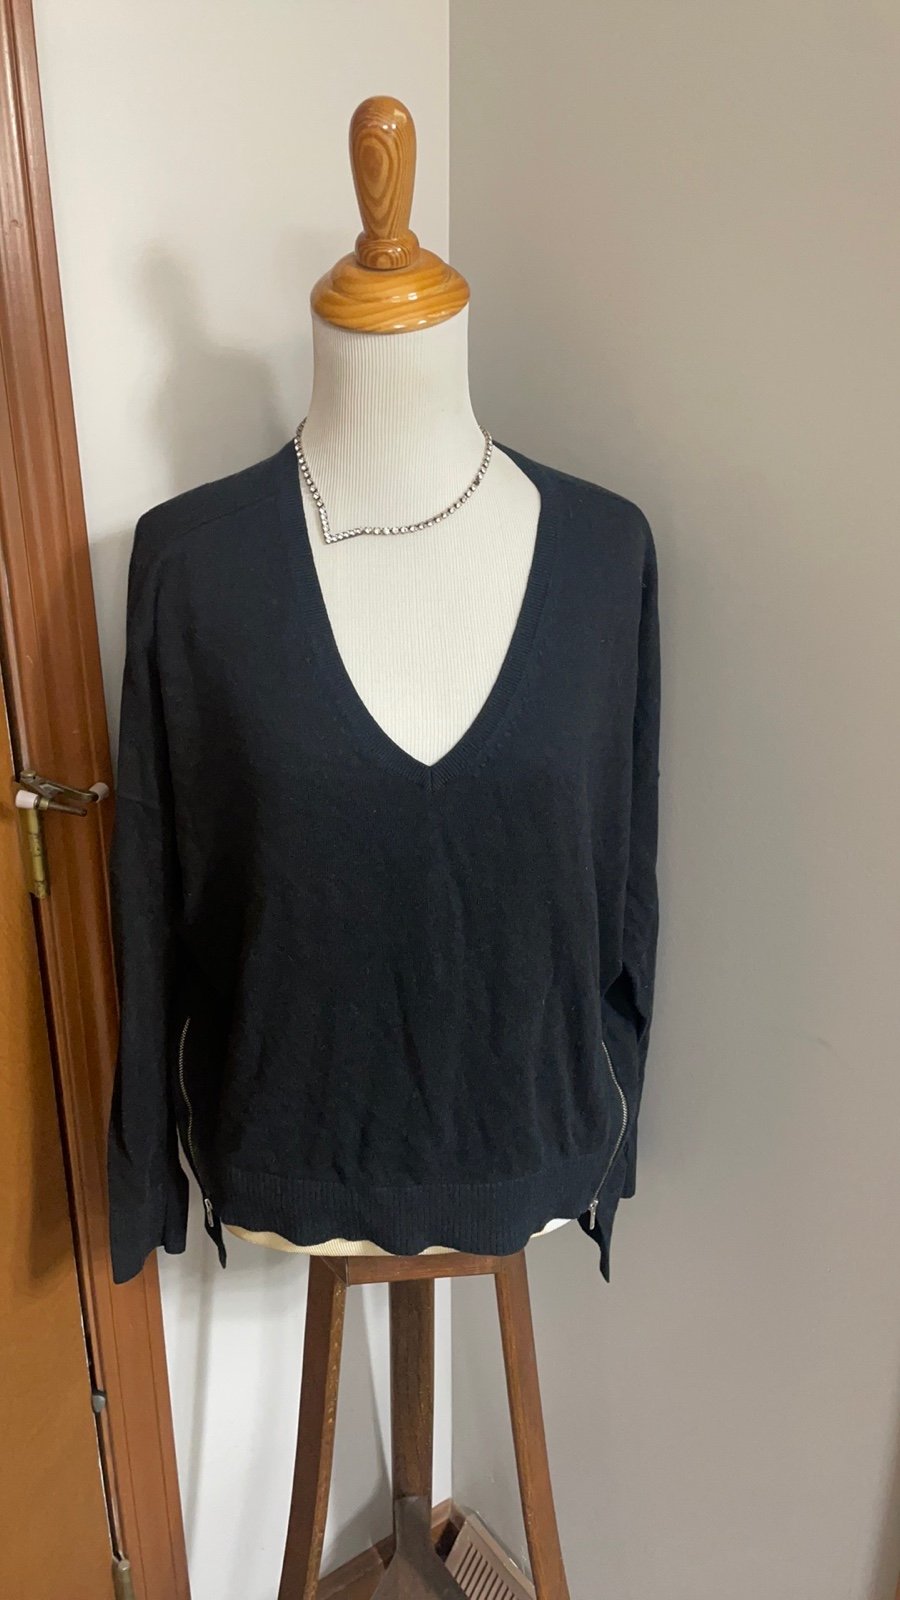 Express v neck black sweater with zip accents dolman sl